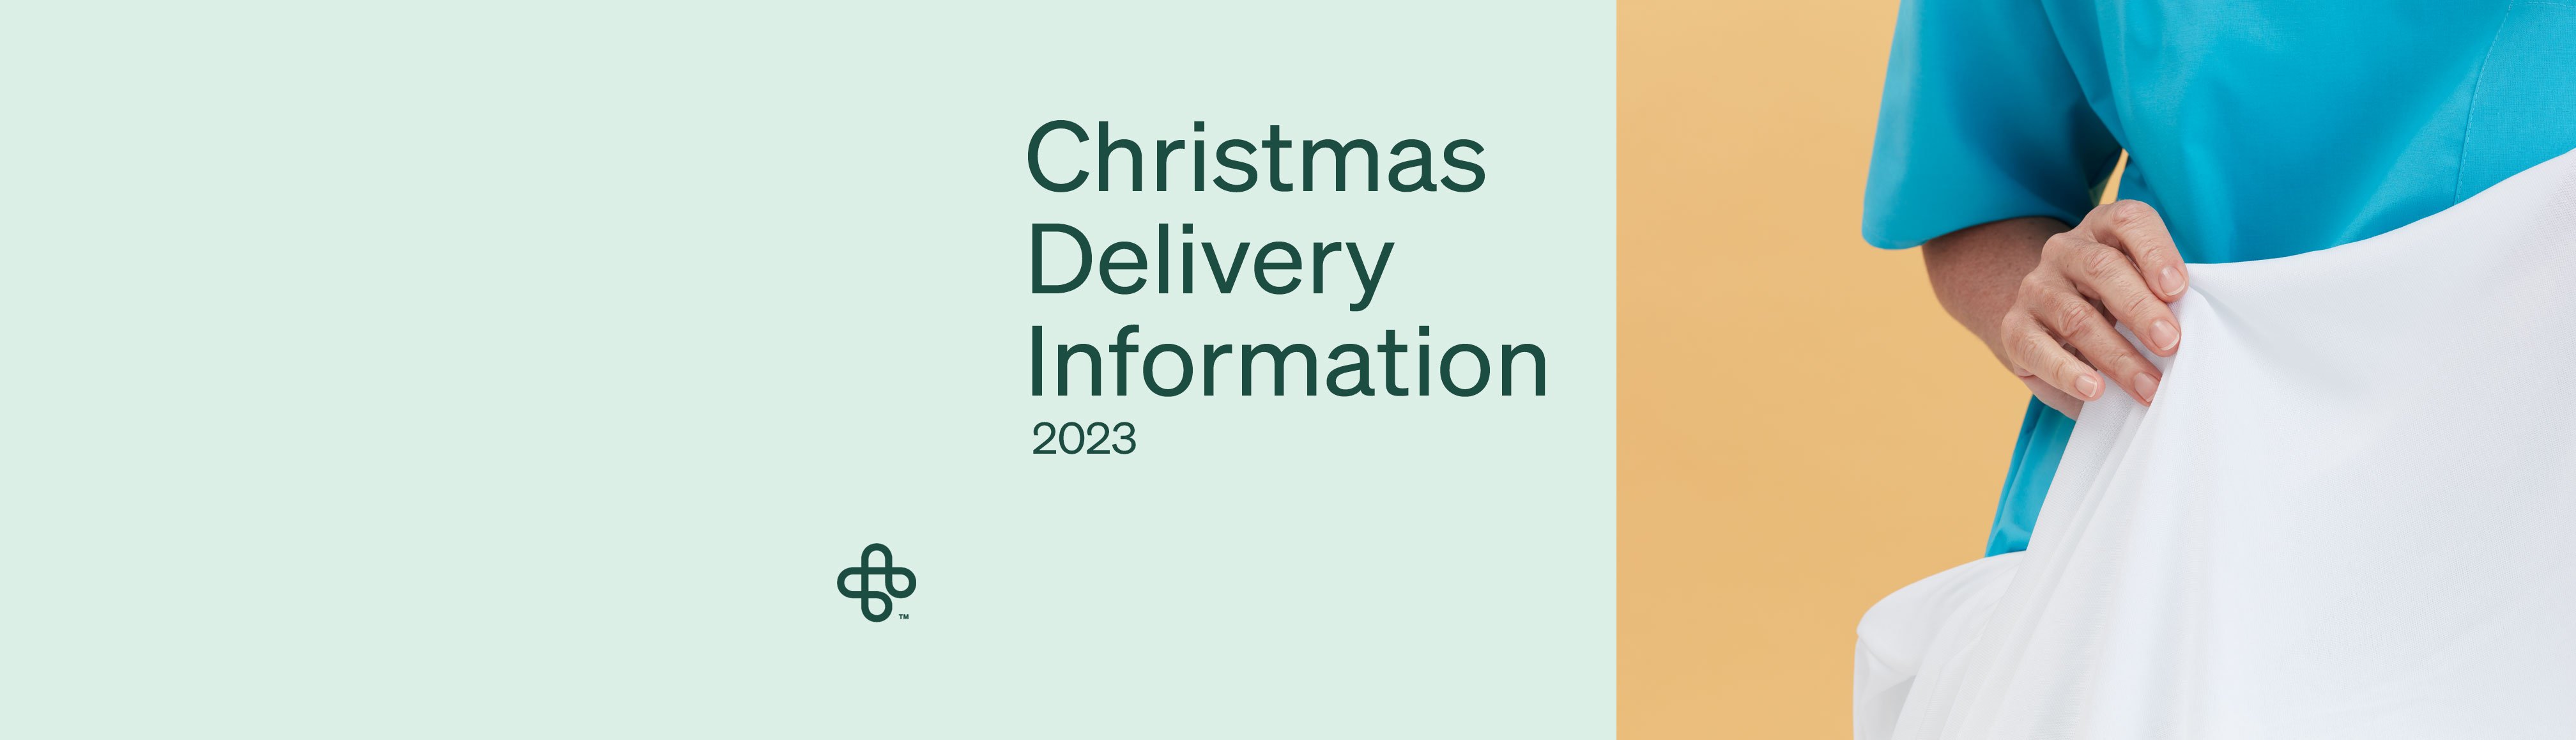 Christmas Delivery Information 2023